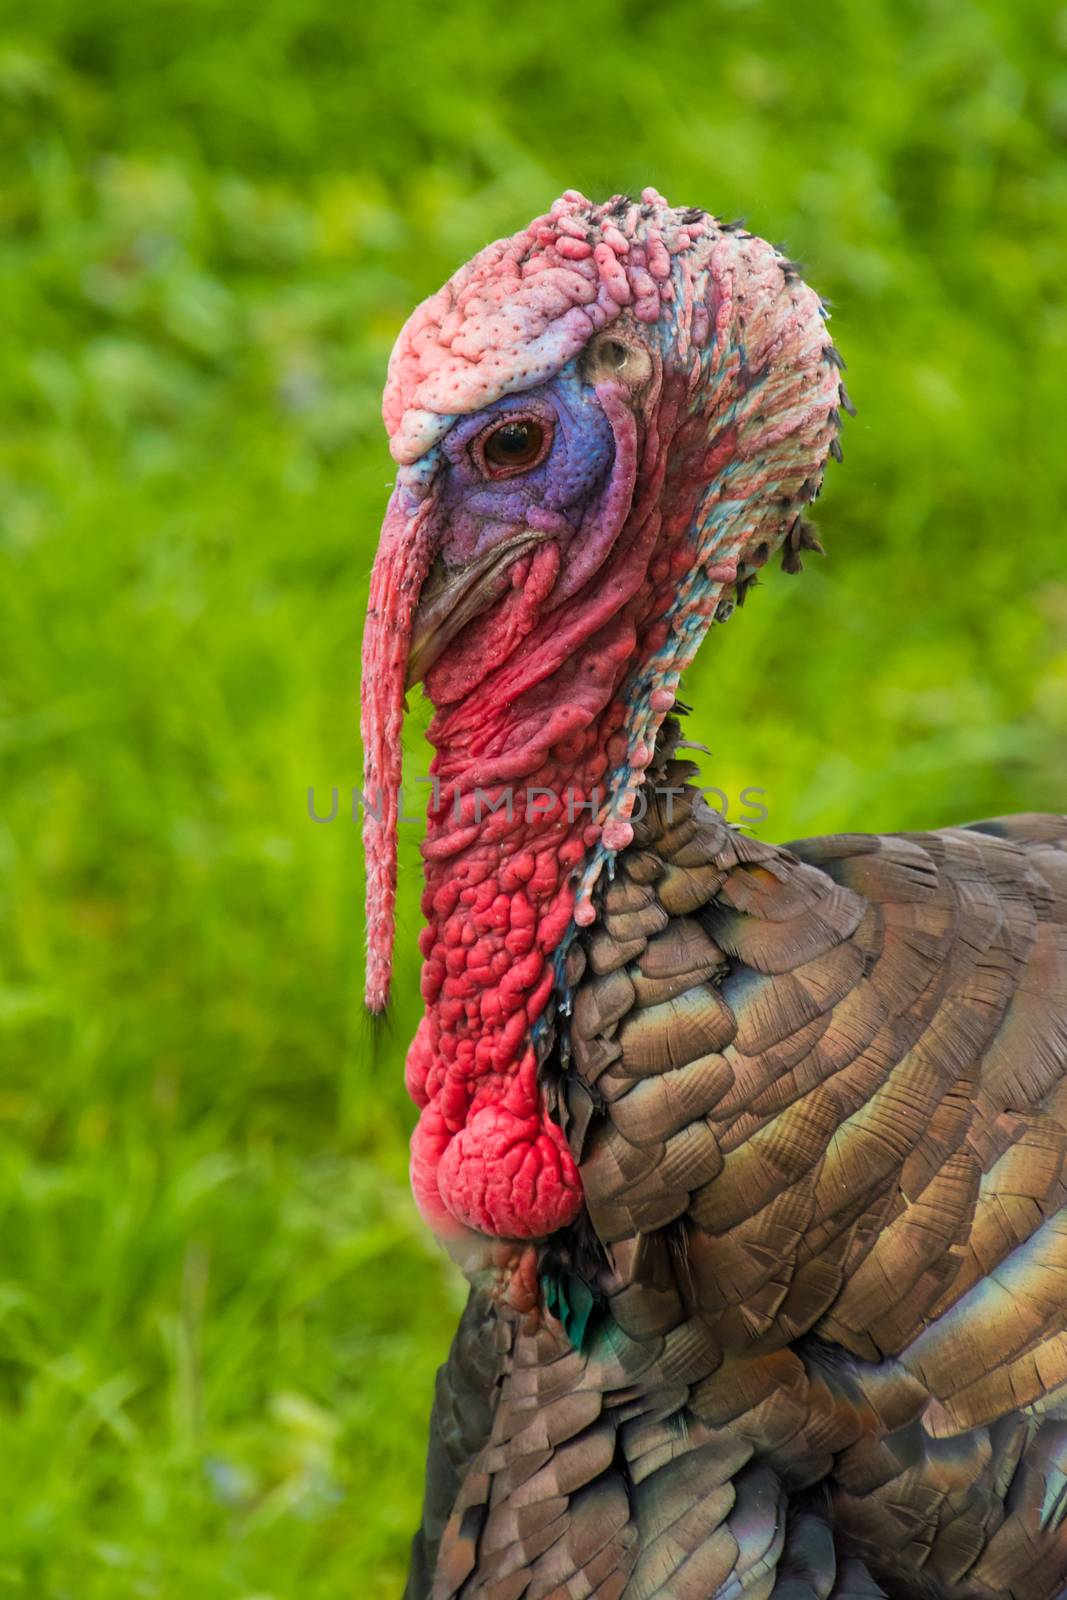 Bronze turkey gobbler colorful feathers and skin